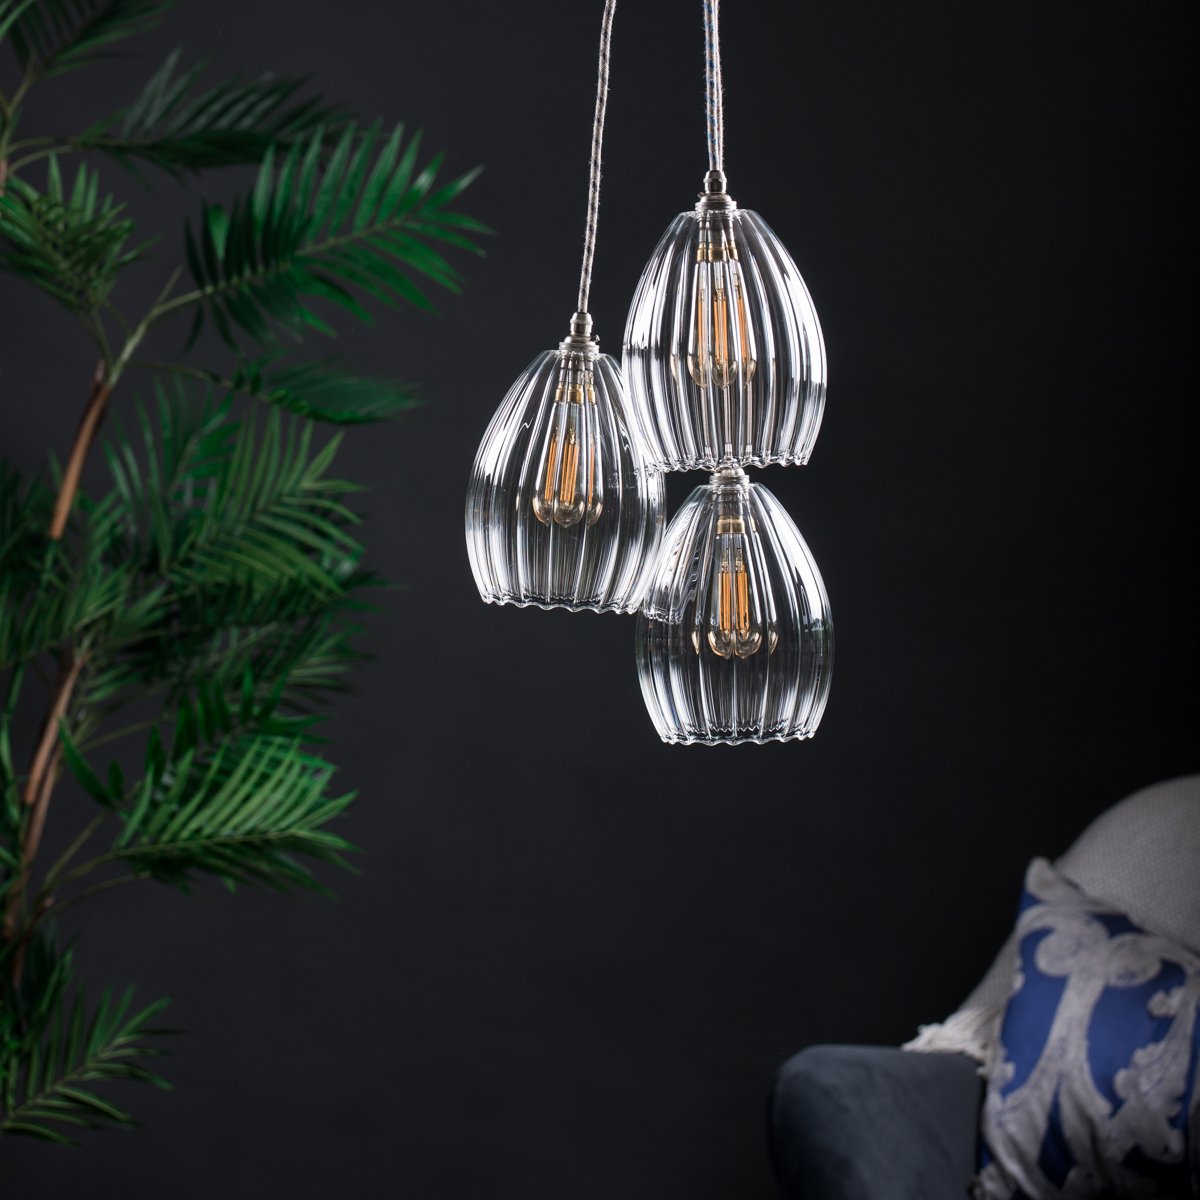 Image of Molly mid 3 way cluster glass pendant light